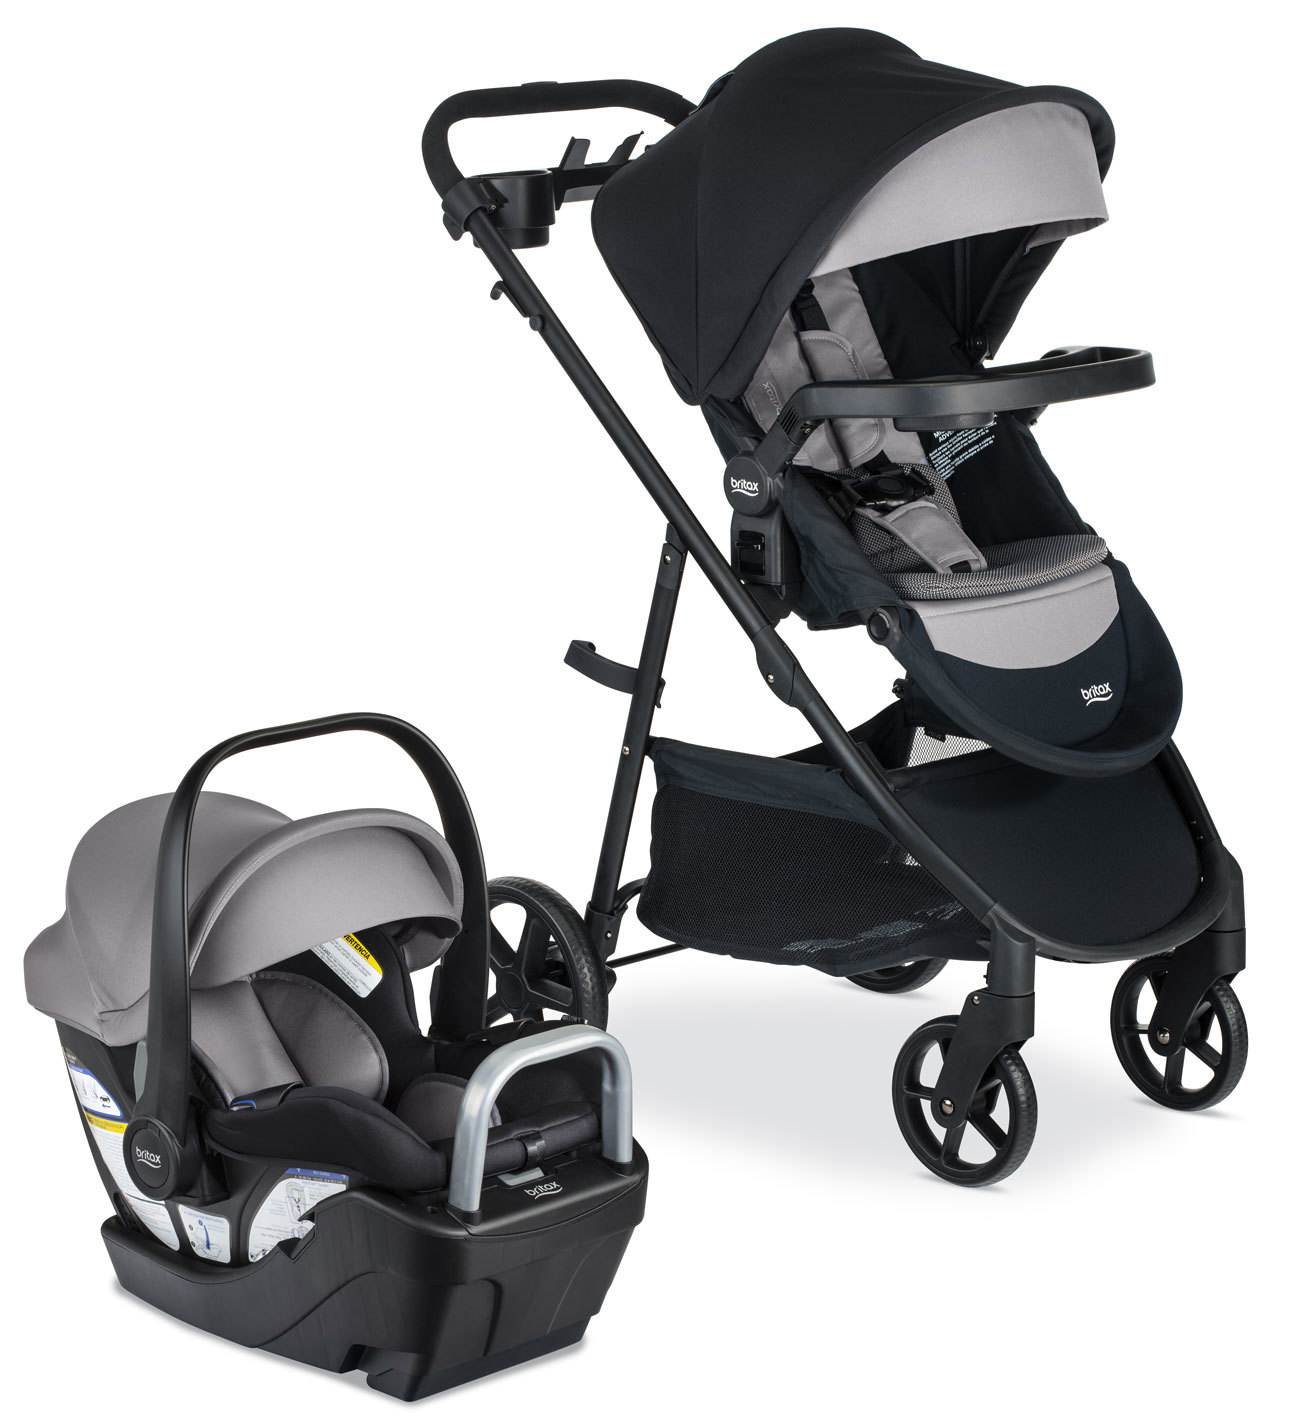 Willow Brook S+ Travel System in Graphite Onyx fashion